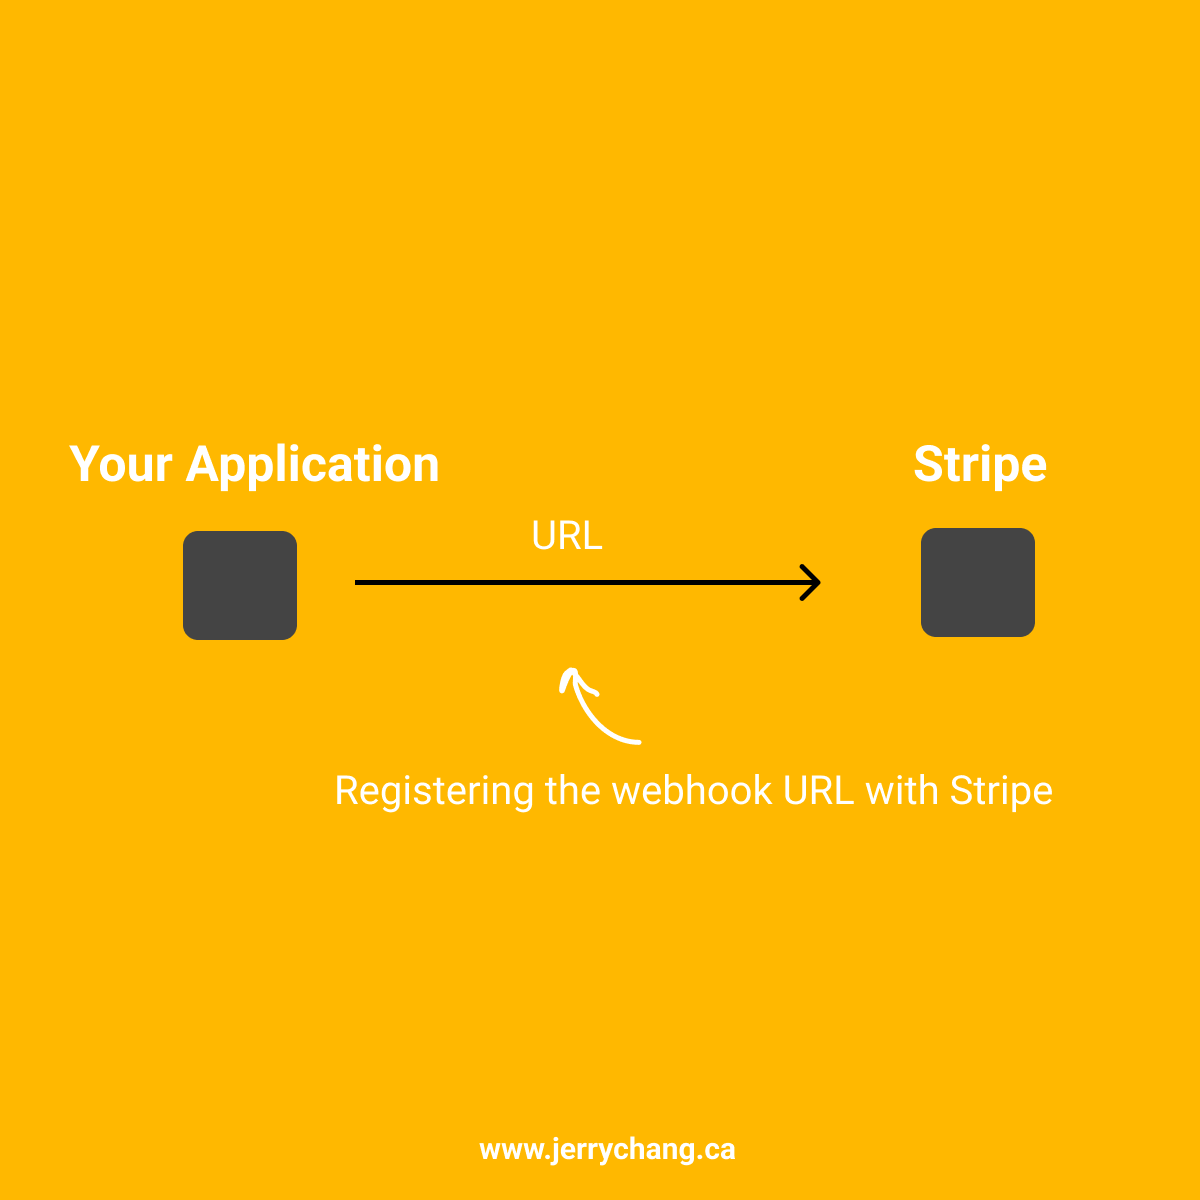 Registering our webhook url with Stripe